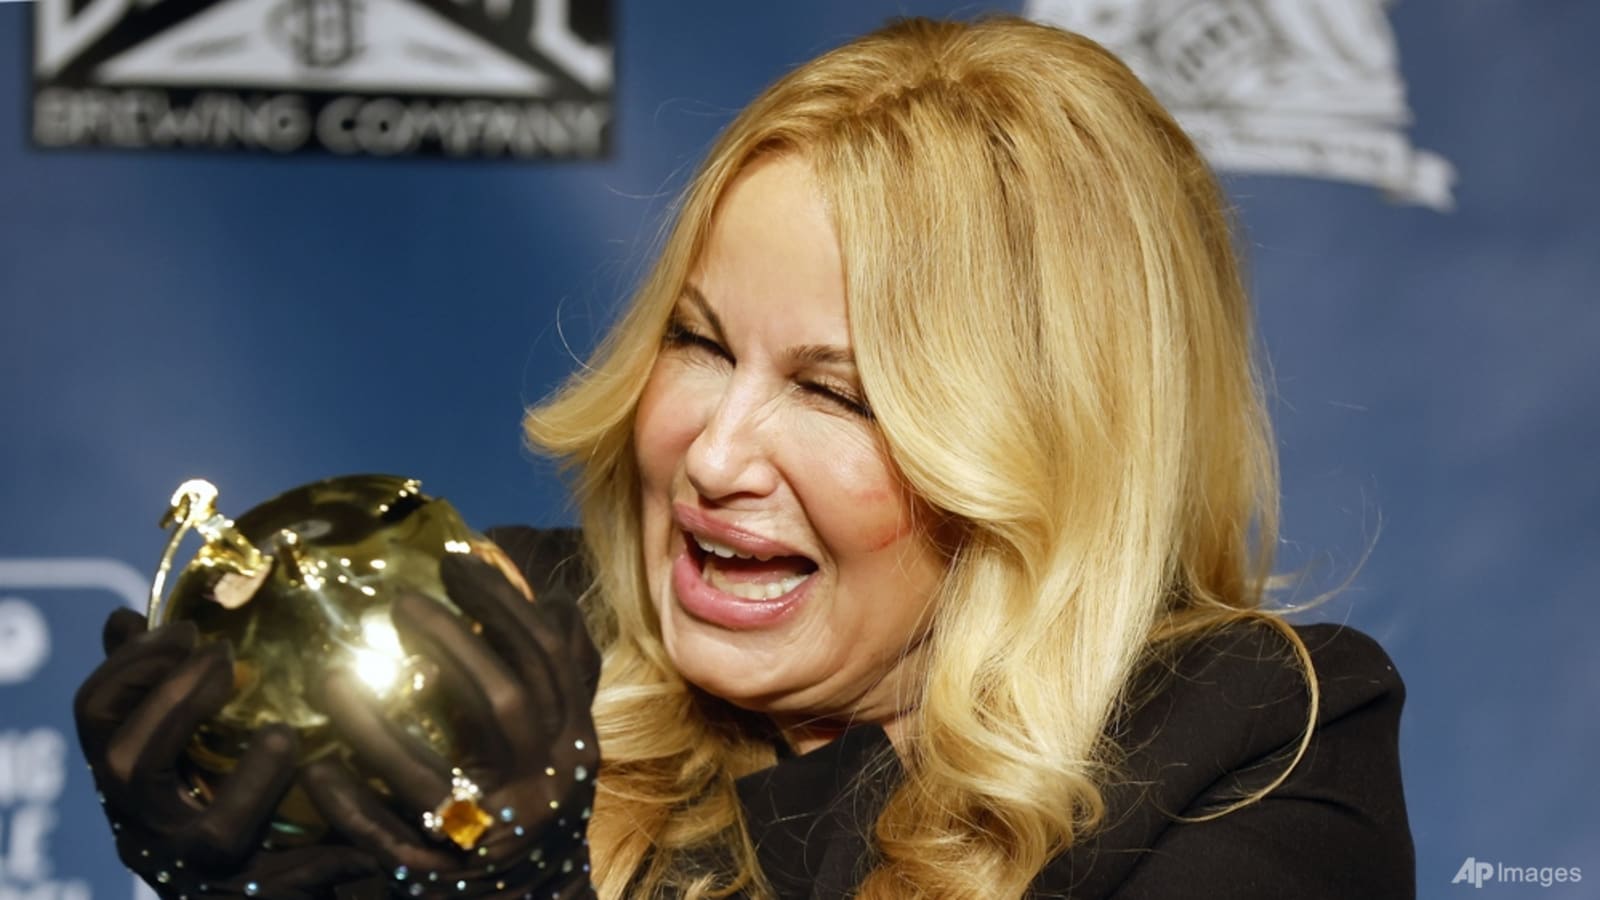 the-white-lotus'-jennifer-coolidge-crowned-hasty-pudding's-woman-of-the-year